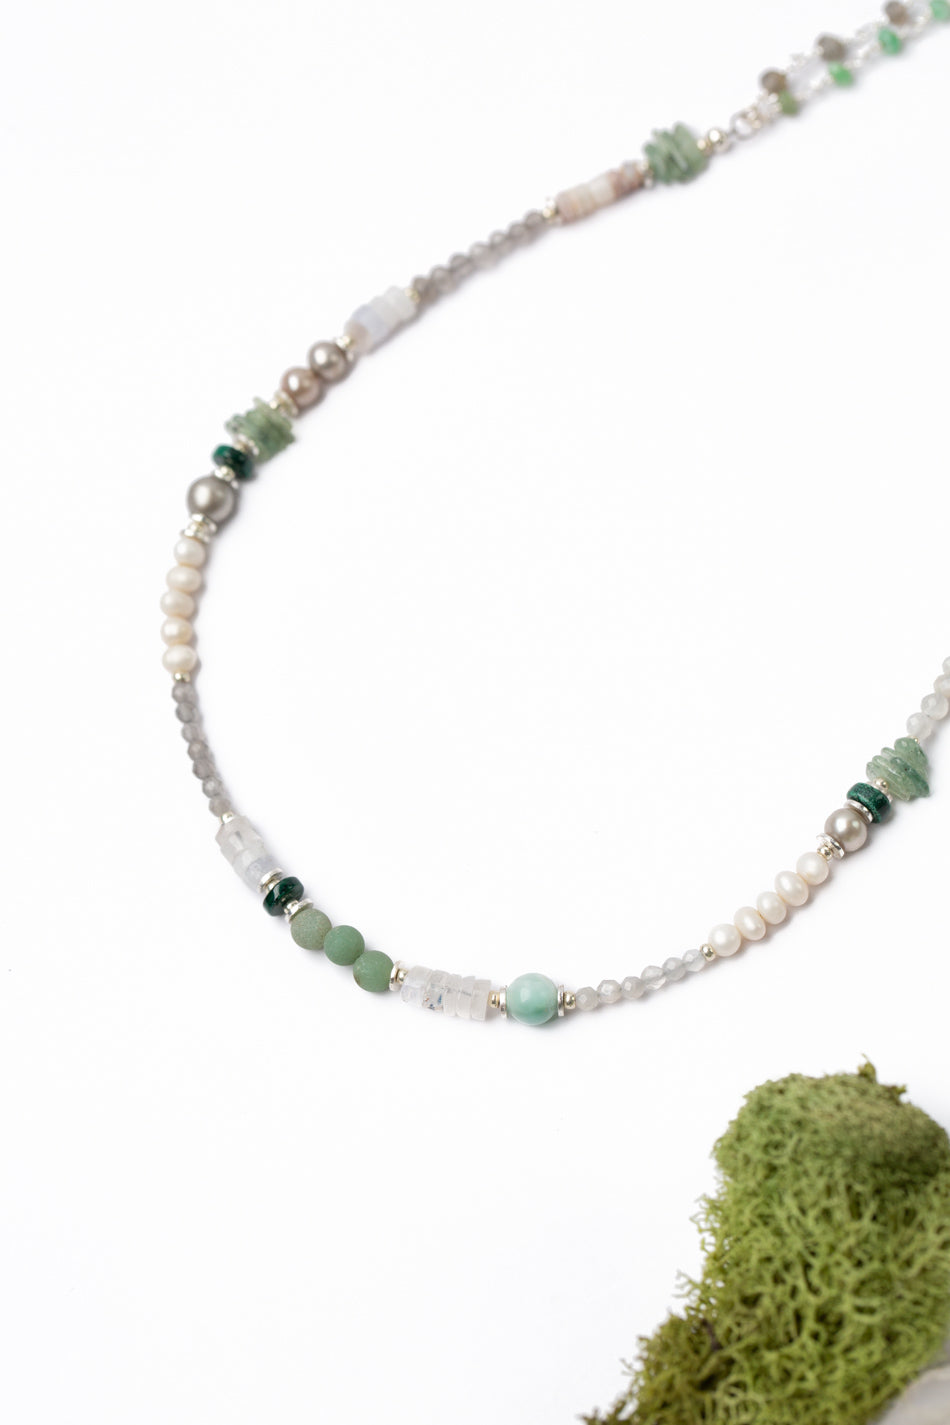 Spring Frost 34-36" Freshwater Pearl, Opal, Moss Agate Collage Necklace